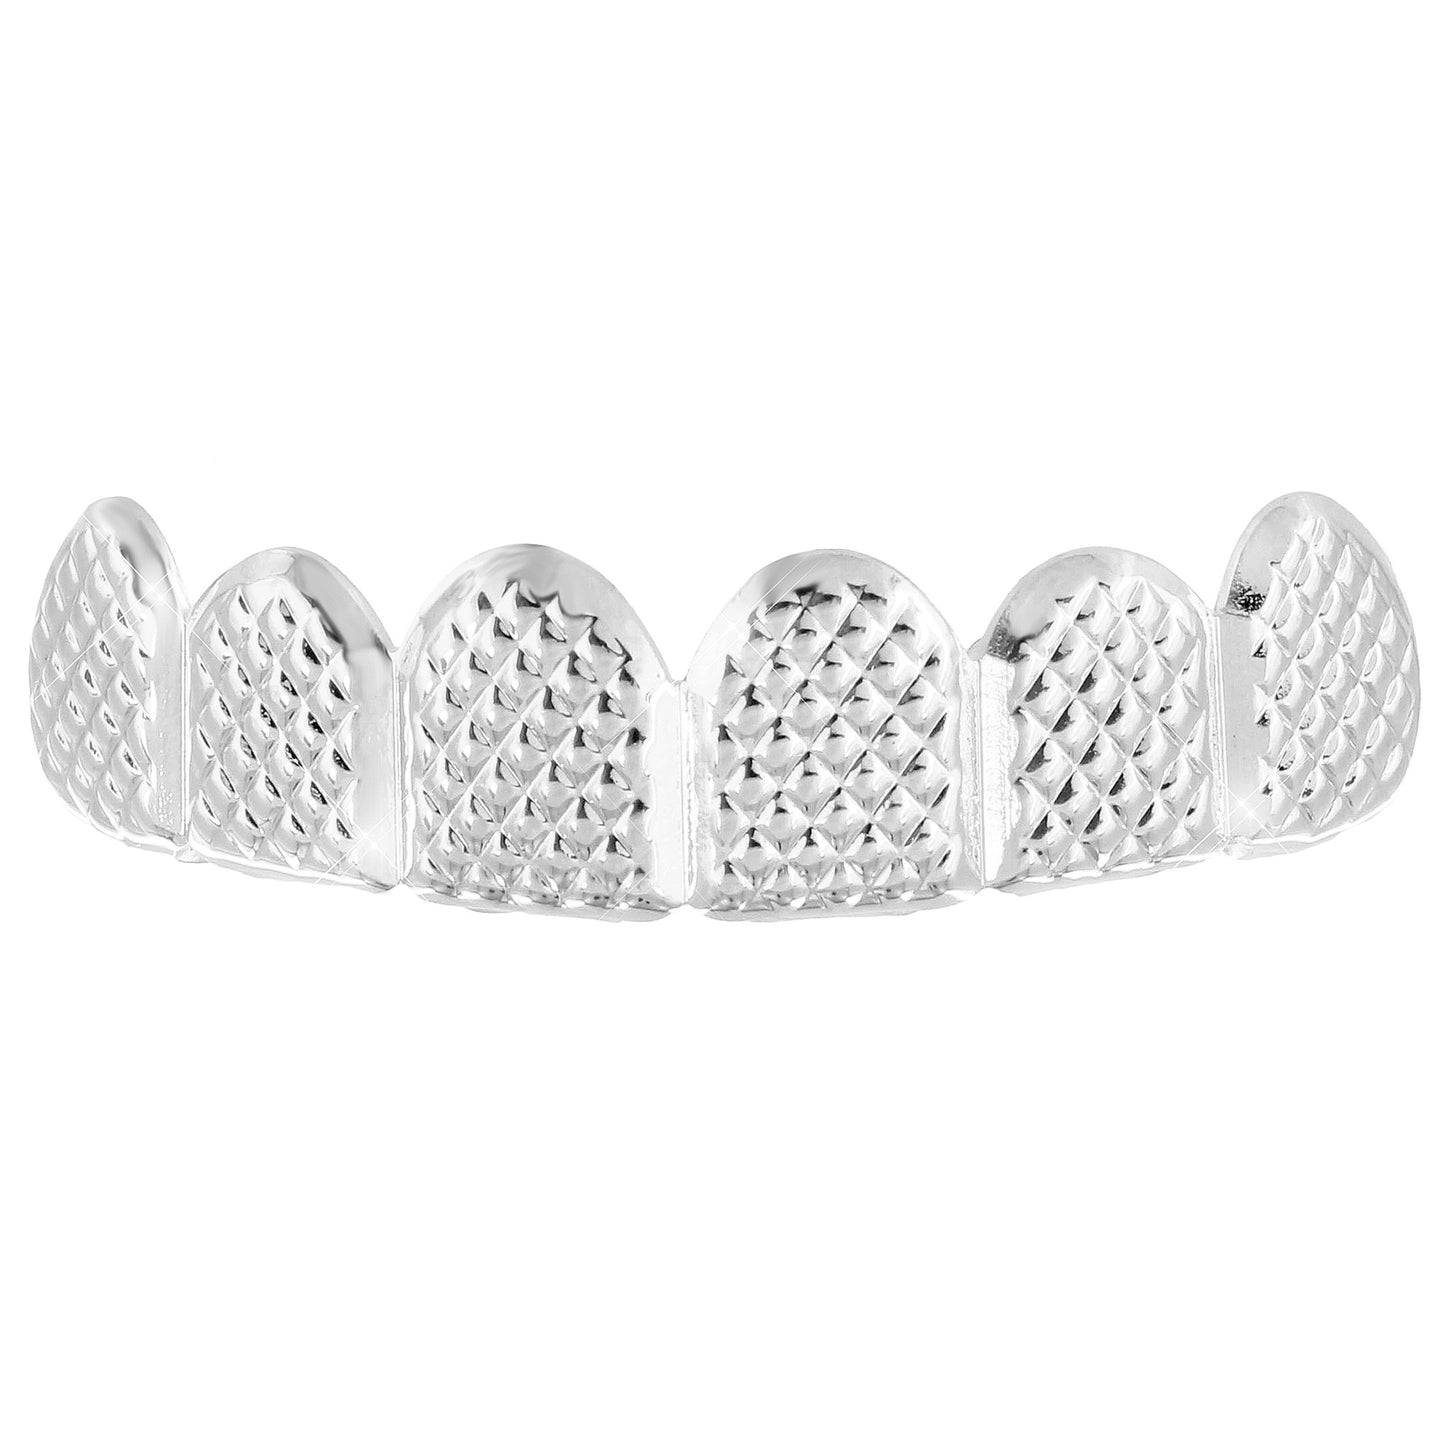 Designer White Gold Finish Top Teeth Mouth Grillz